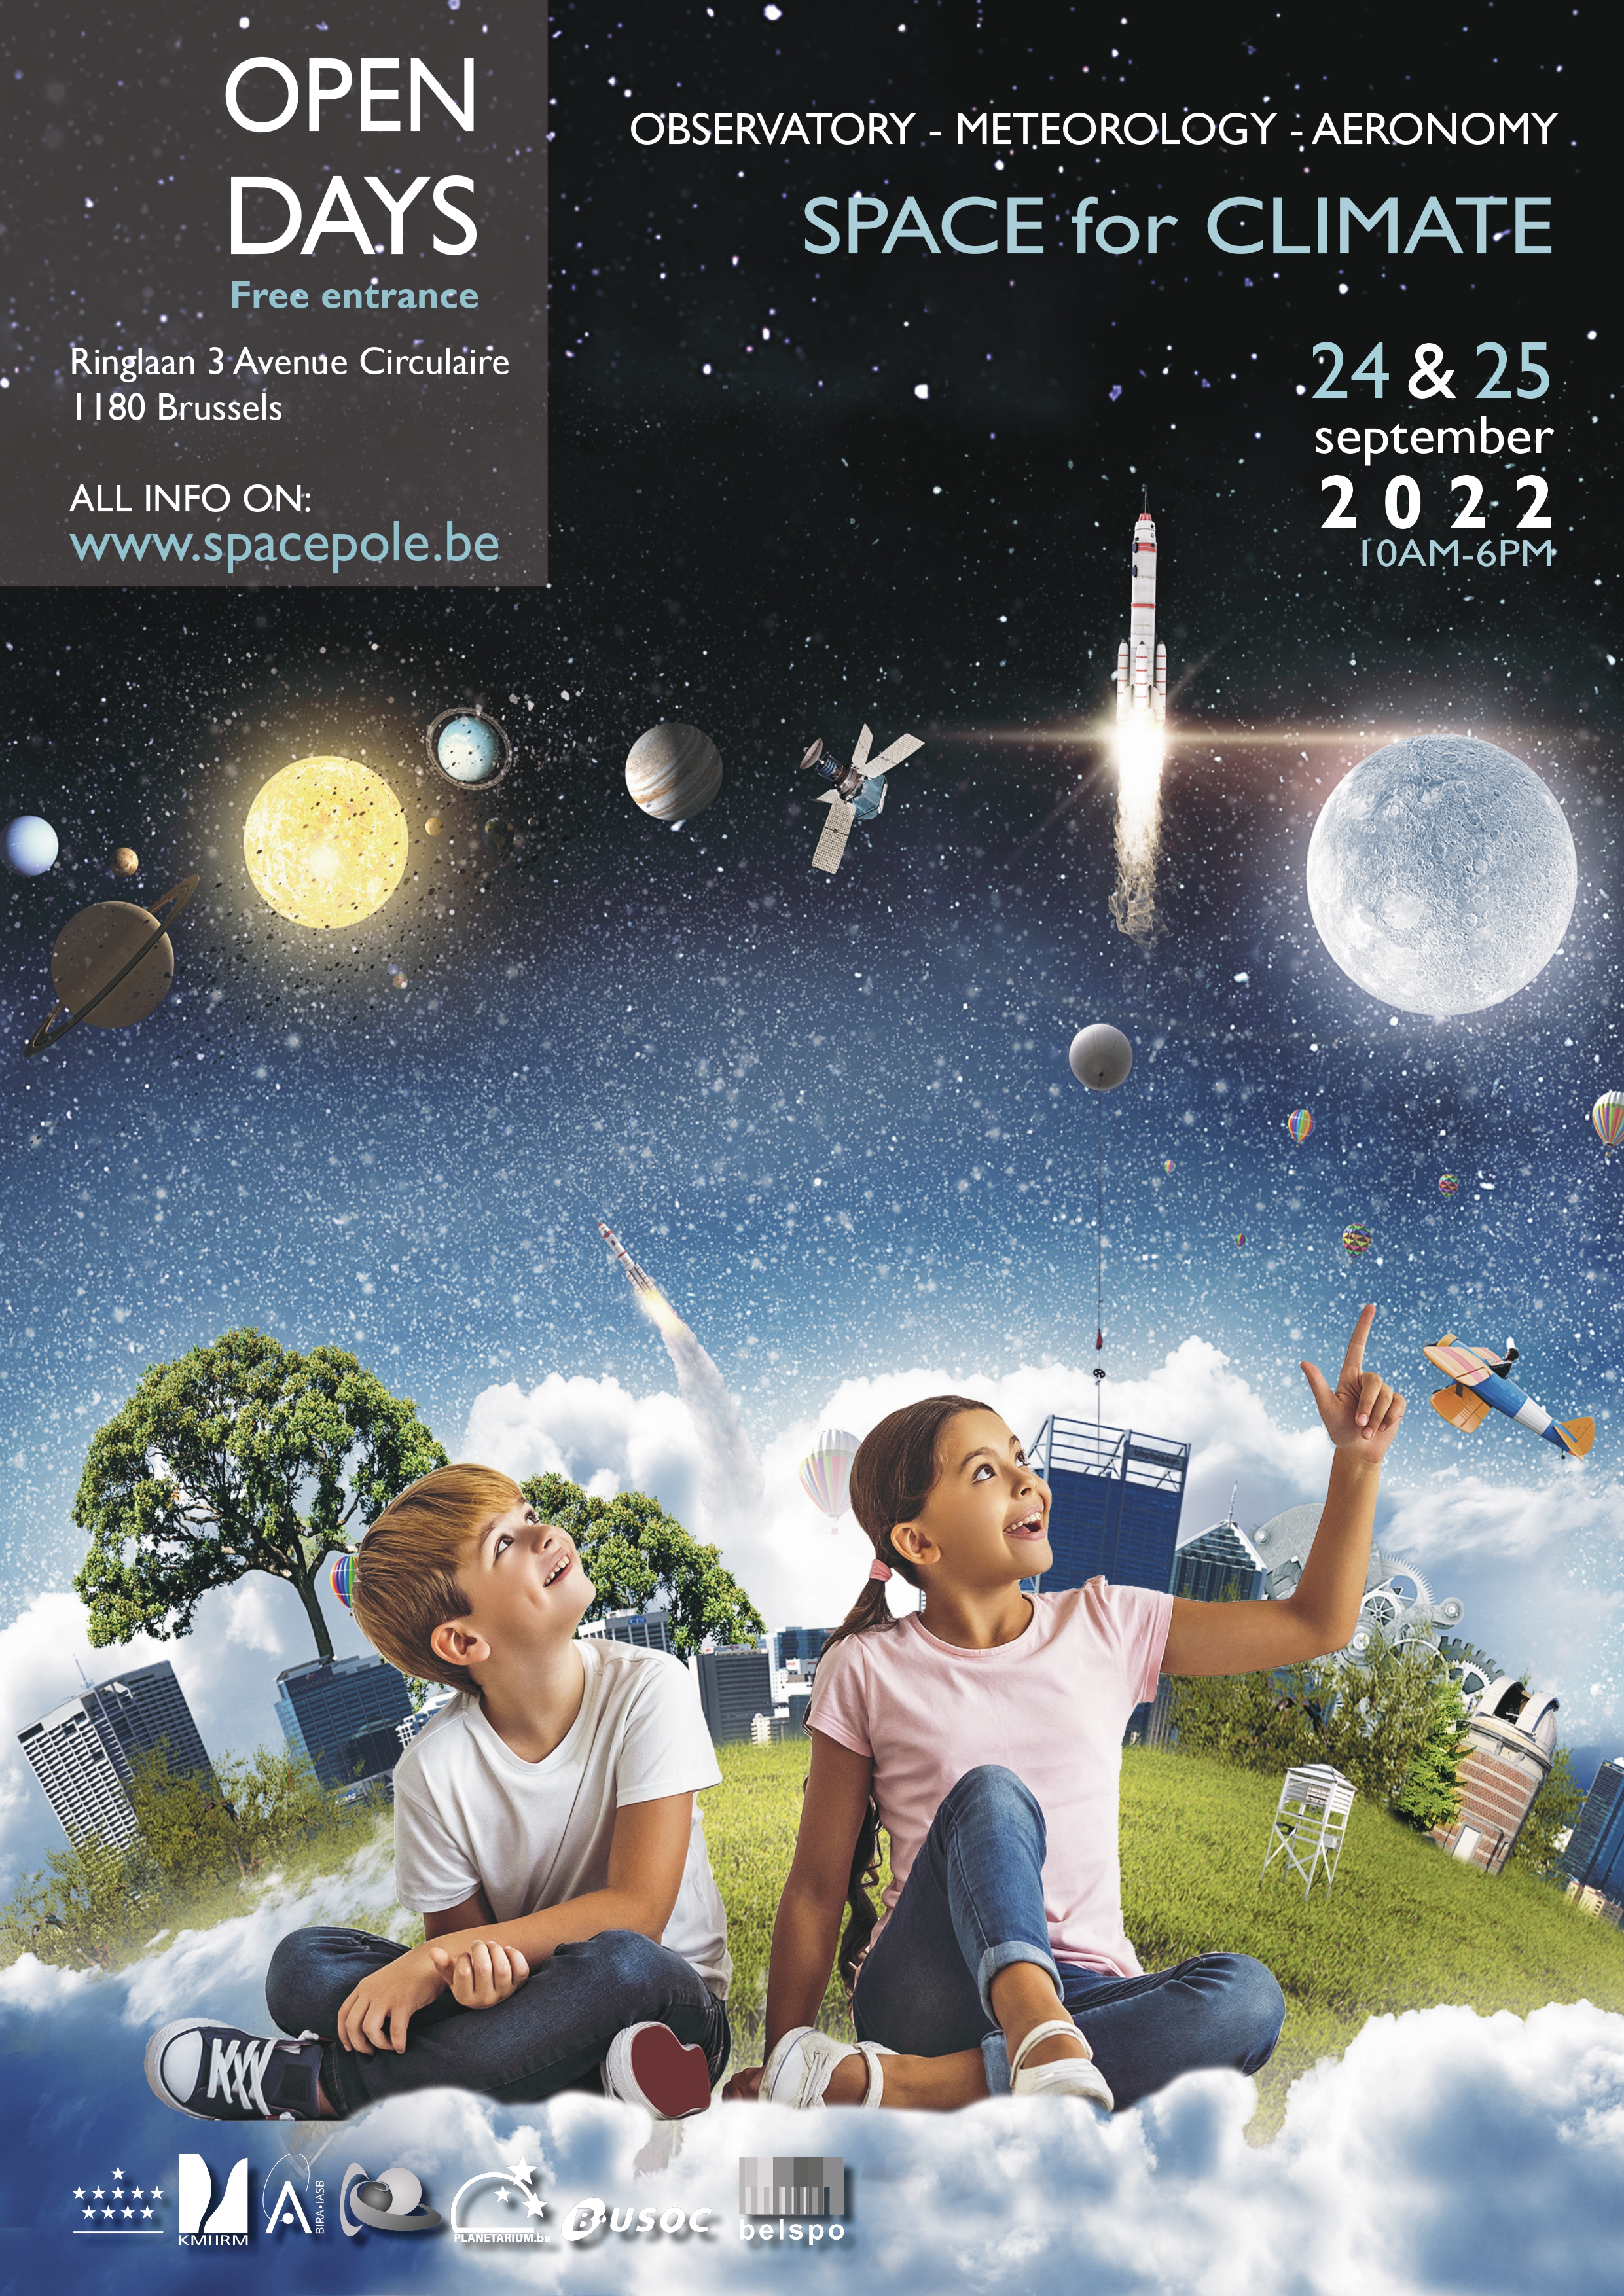 Poster for the OPen Doors of the Space Pole on 24-25 September